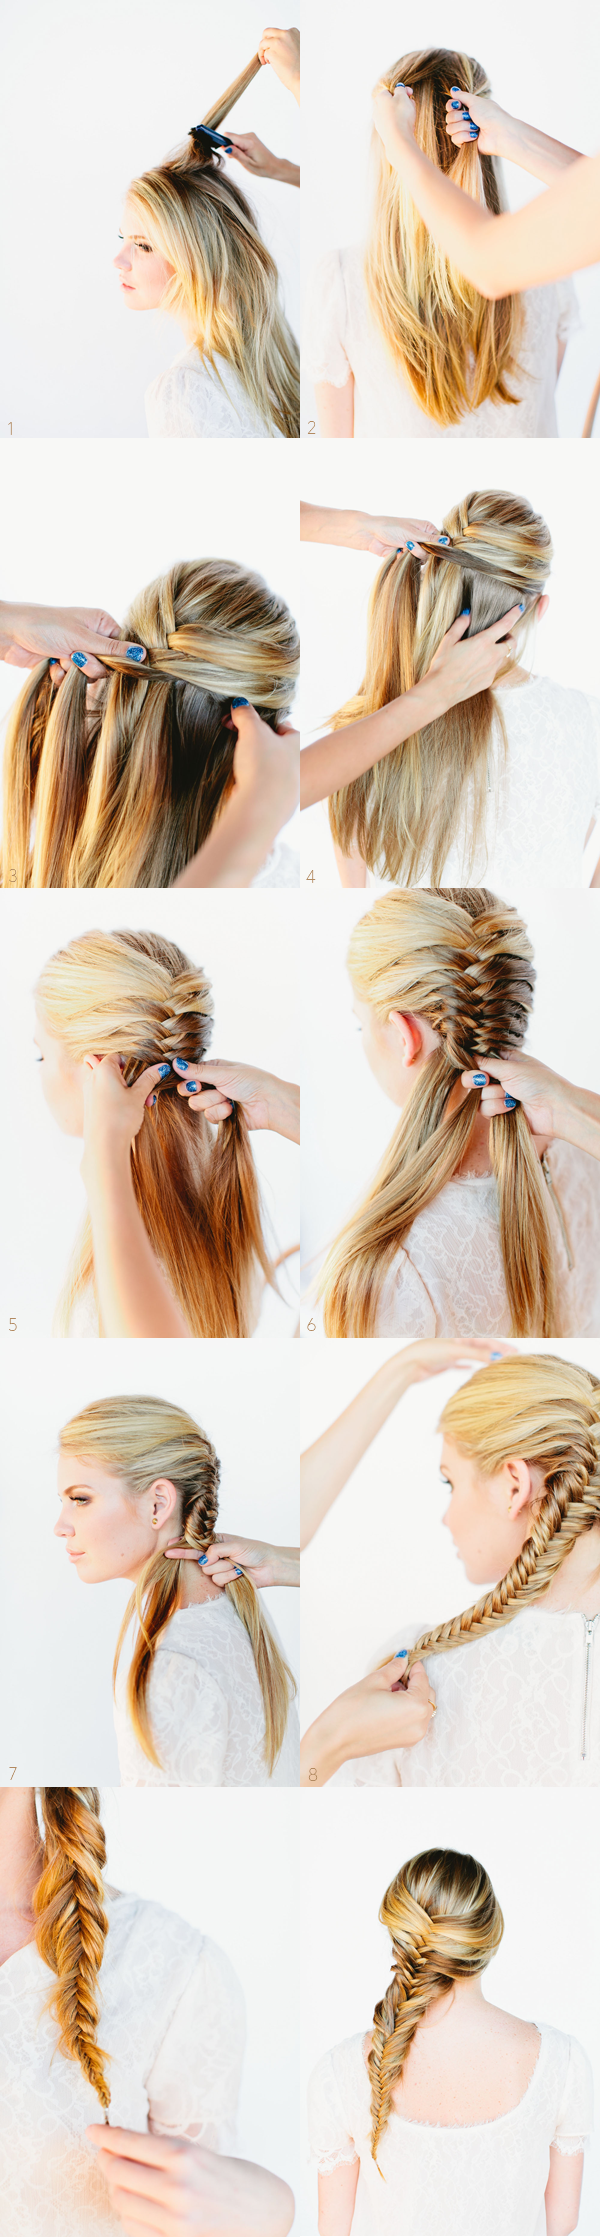 17-Romantic-Hairstyle-Ideas-and-Tutorials-1